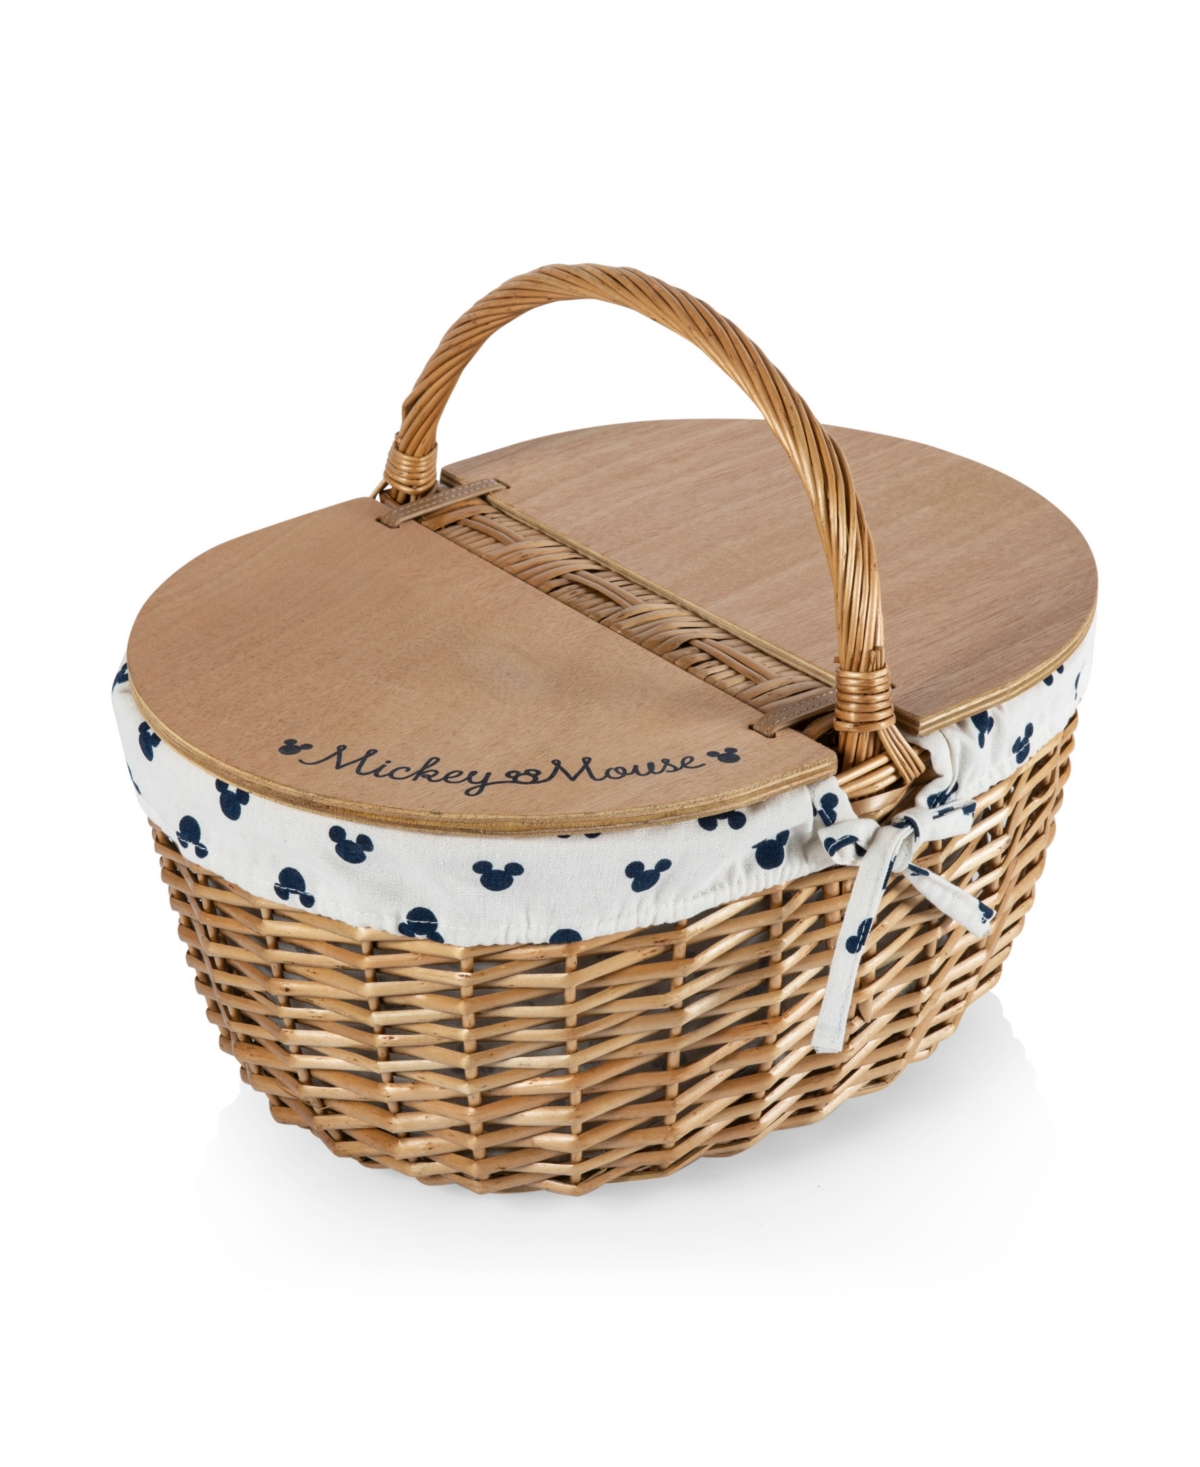 Disney Mickey Silhouette Country Basket - Cream with Navy Blue Pattern